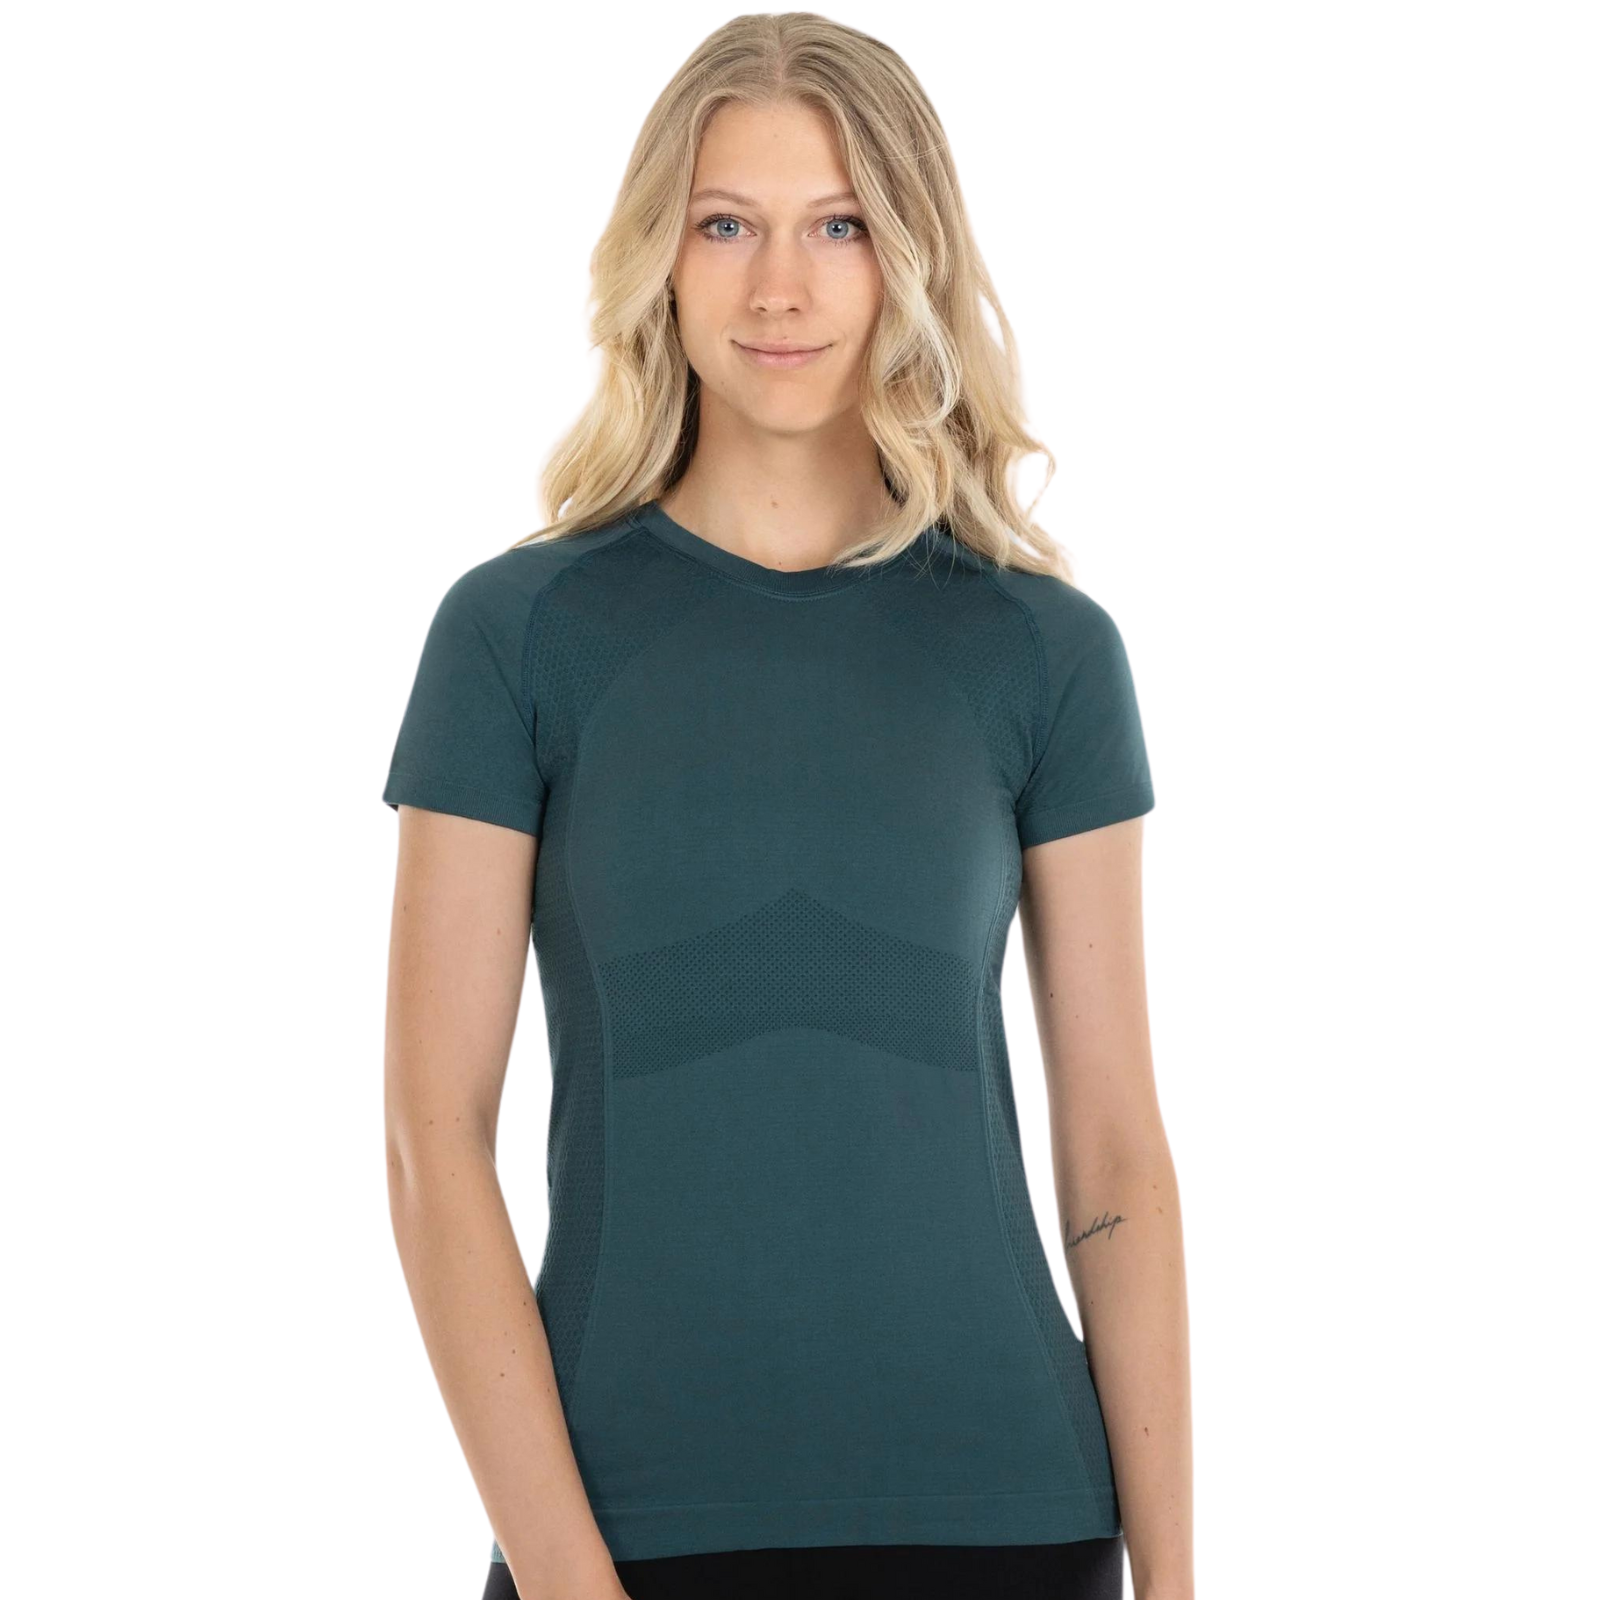 Anique Short Sleeve Crew Shirt in Peppermint - Women&#39;s Small (4-6)